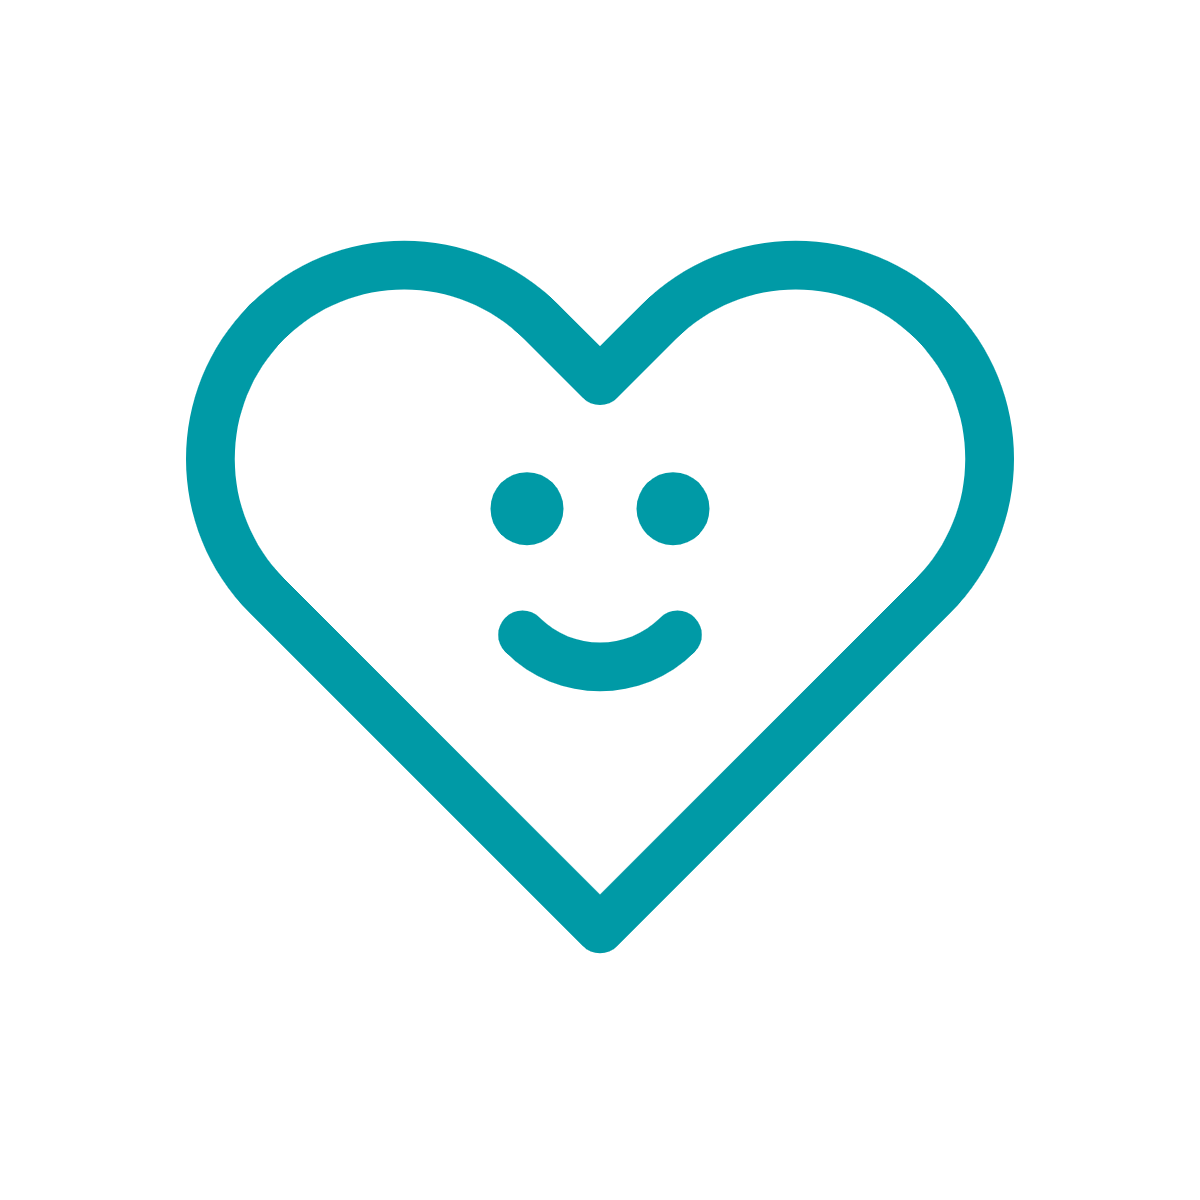 Green icon of heart with smile inside it